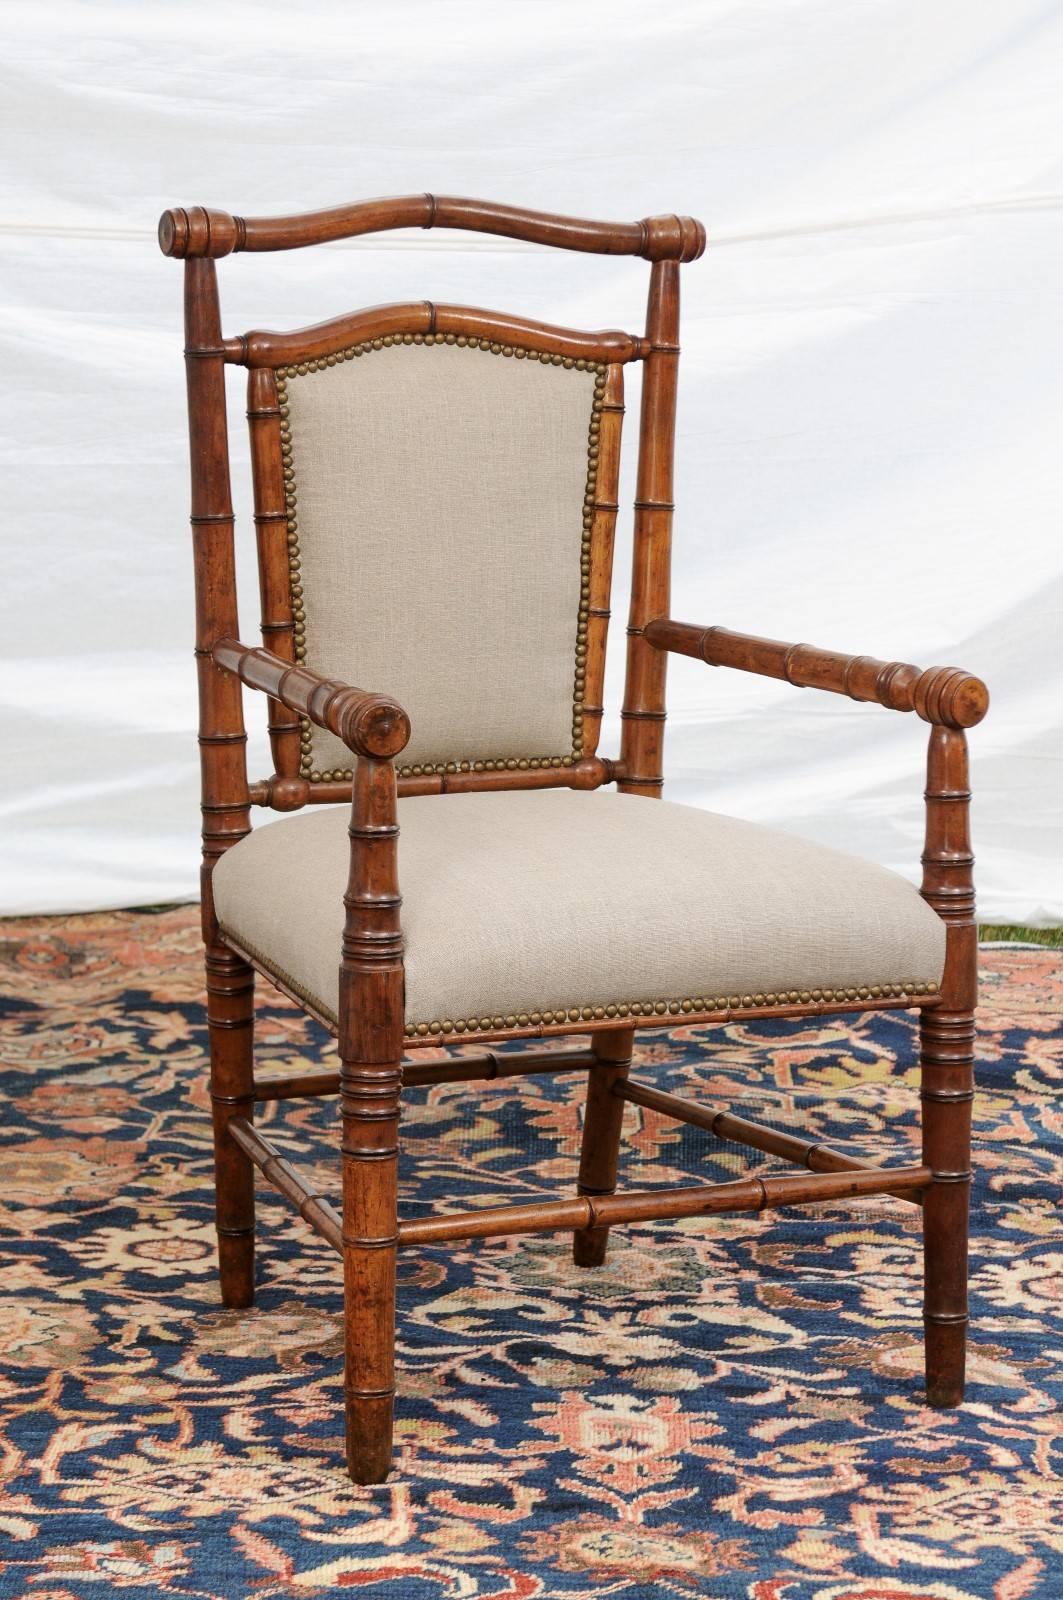 This English faux-bamboo armchair from the turn of the century features a slightly slanted back with partial upholstery and nailhead trim over turned legs with side stretchers. The straight lines seen on the arms, legs and stretchers are gently